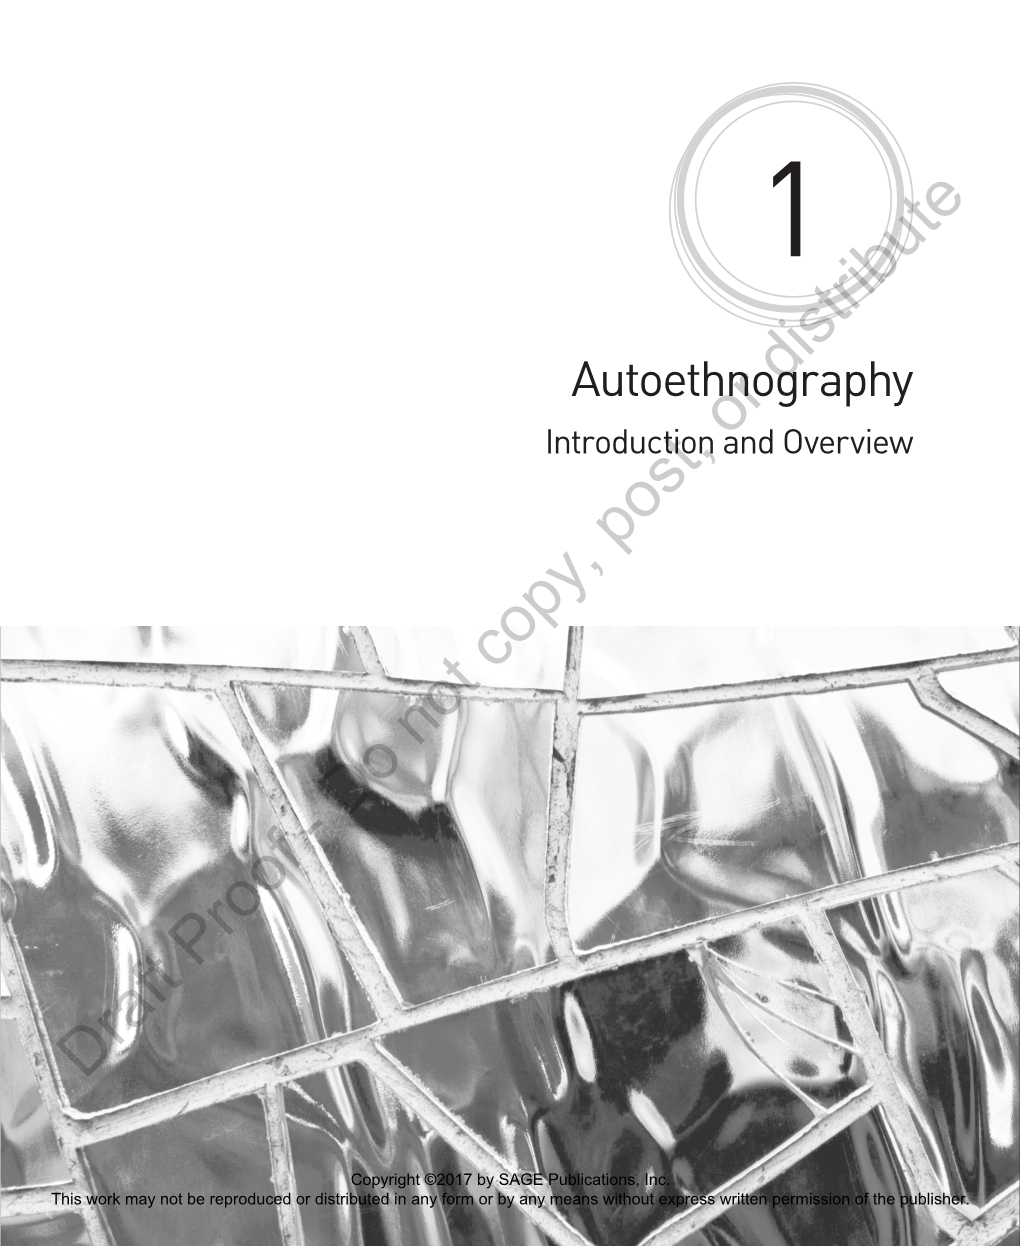 Autoethnography Introduction and Overview